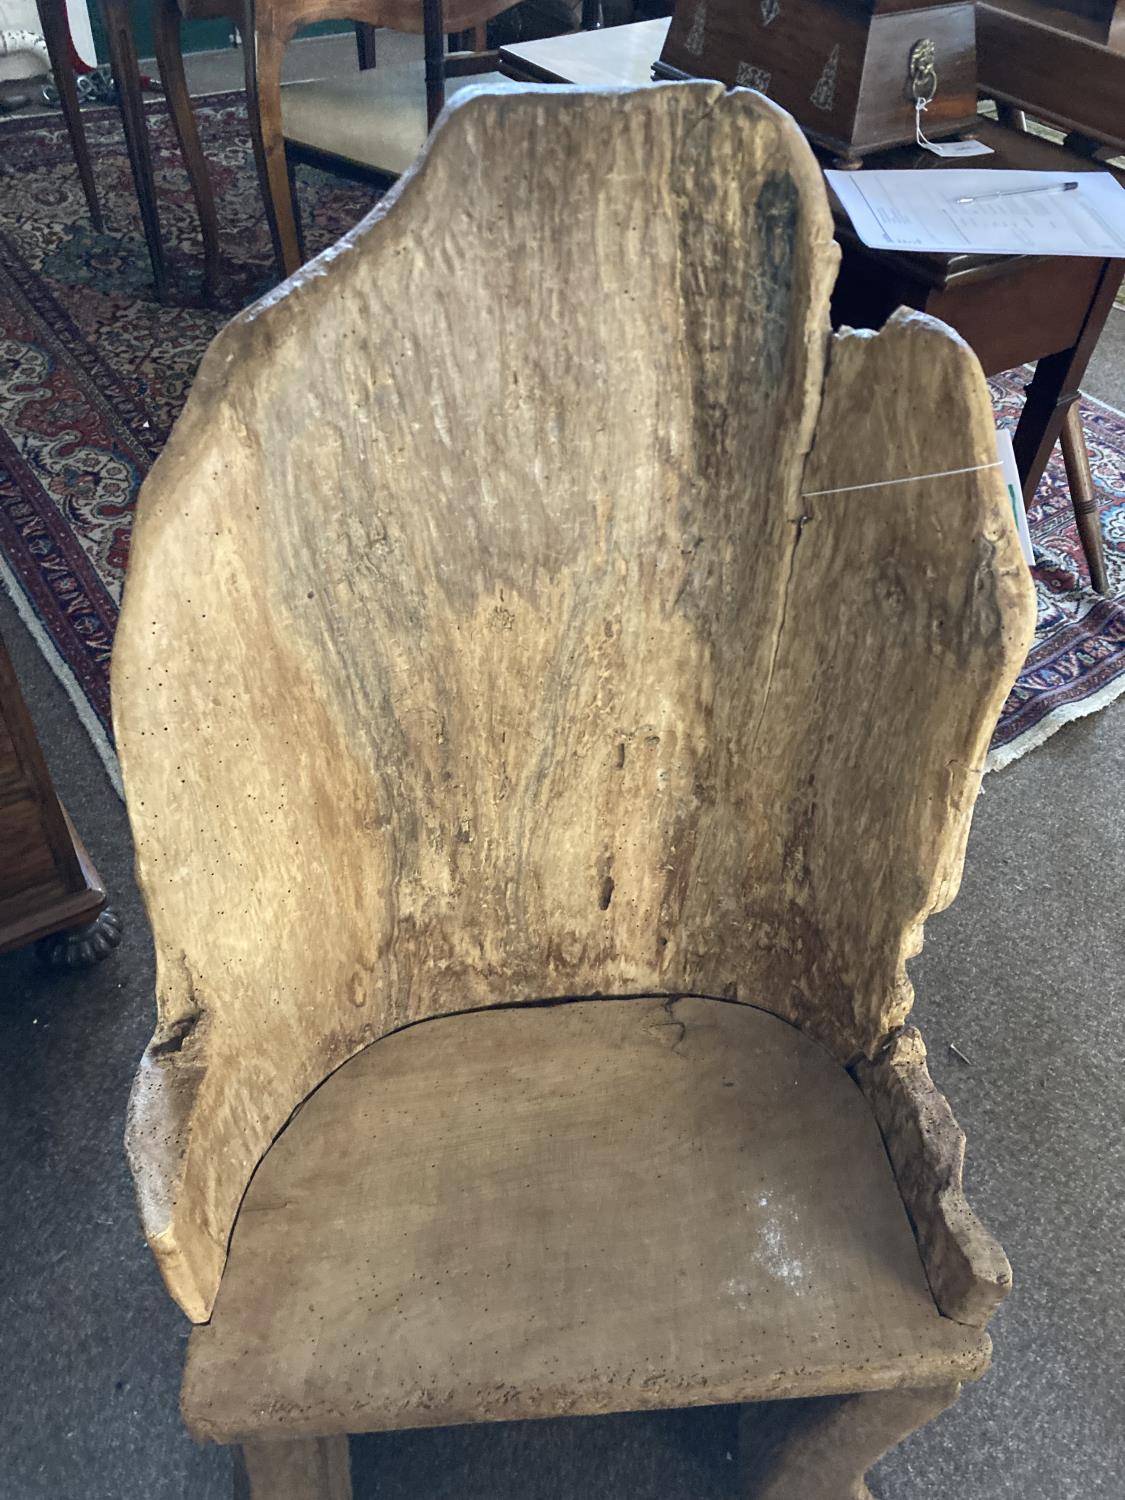 A PRIMITIVE 'DUG OUT' TYPE CHAIR. An unusual 'dug out tree trunk' type chair with solid seat, - Image 3 of 8